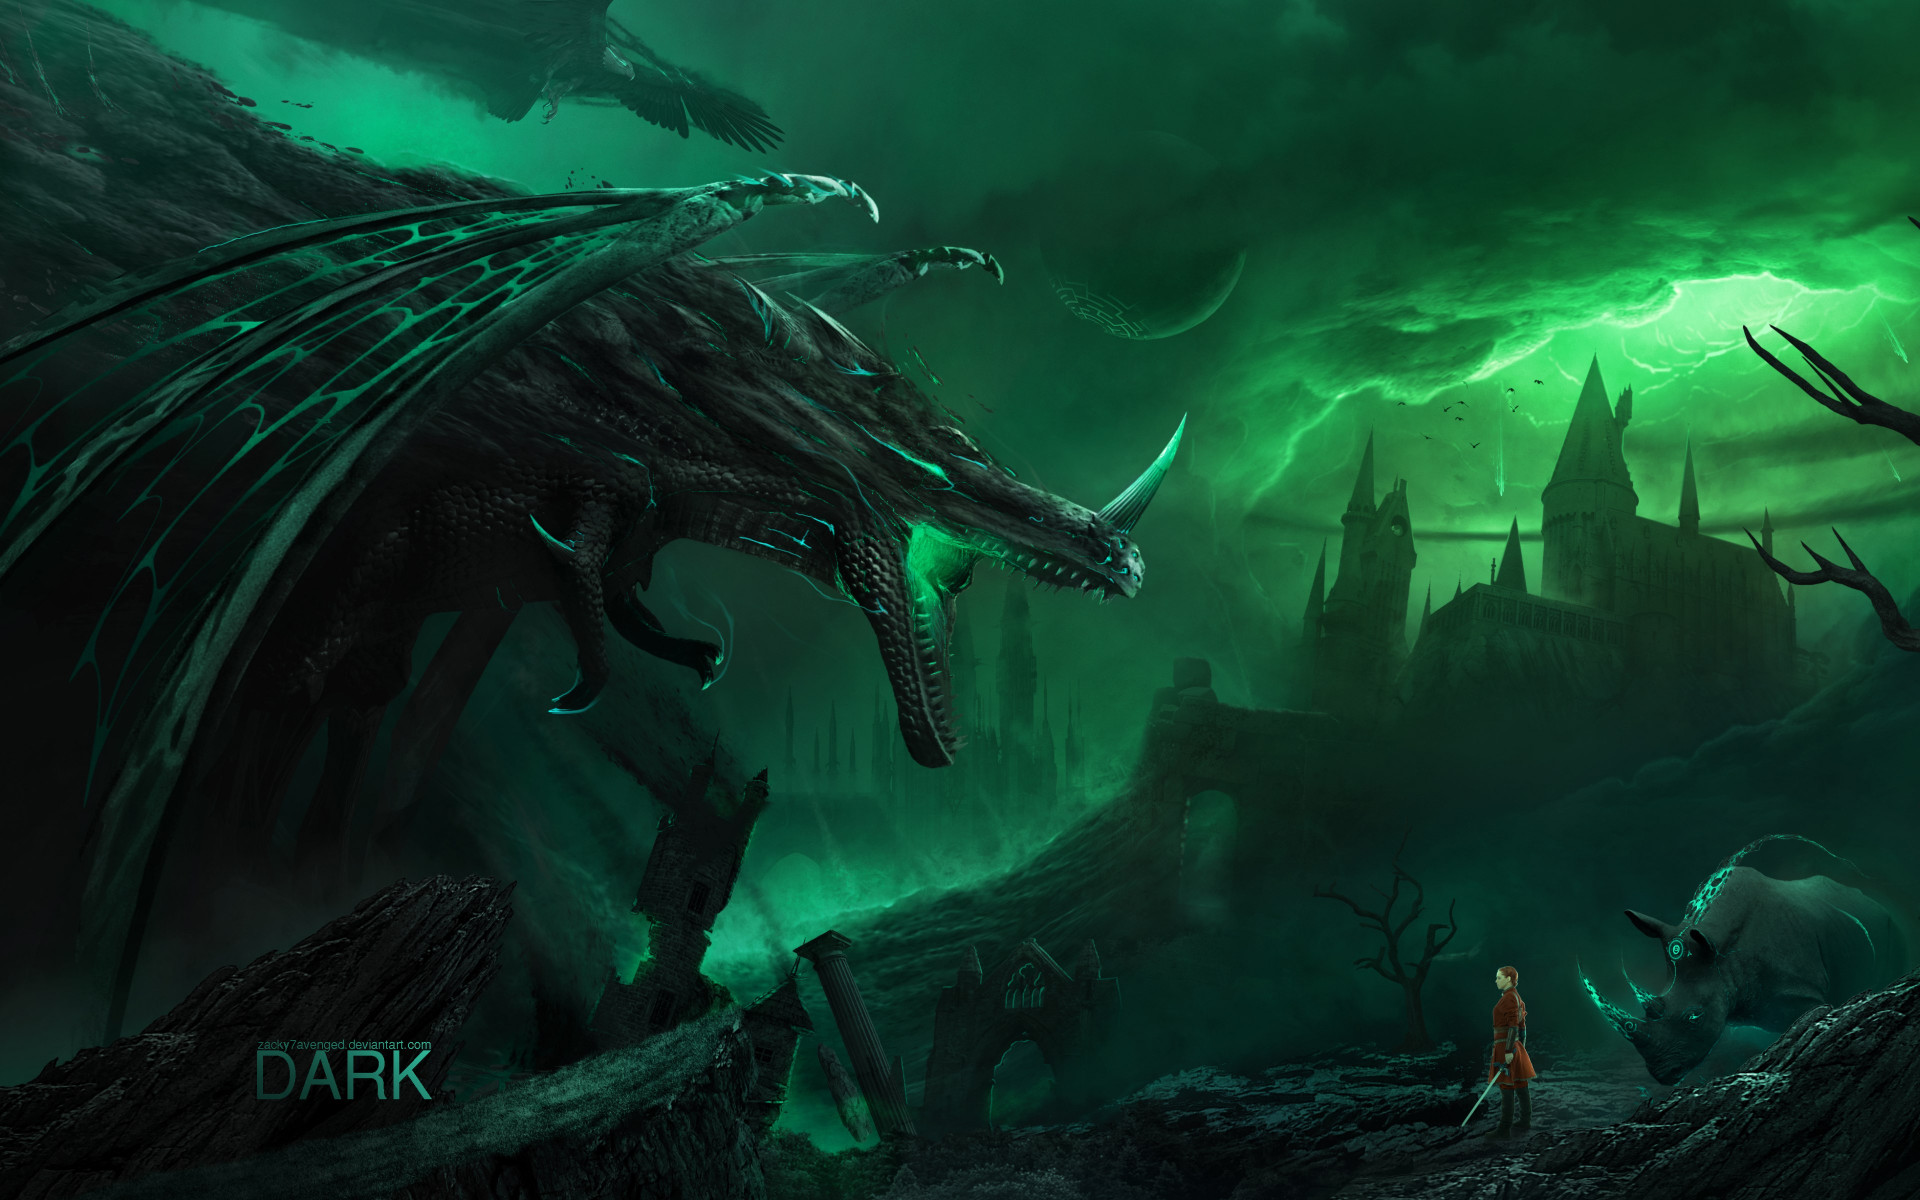 The dark creatures are coming wallpaper 1920x1200